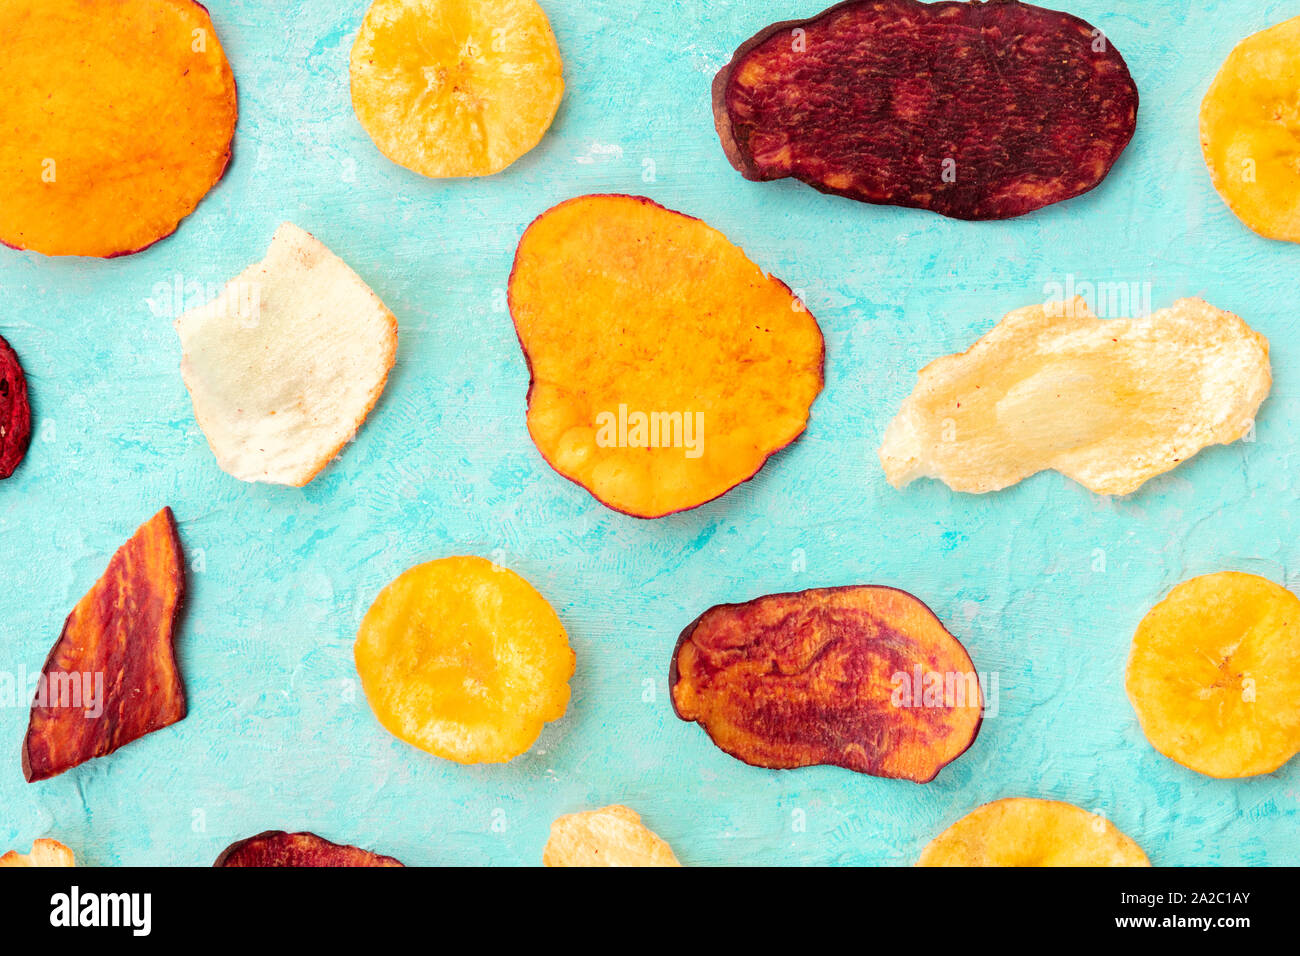 Dry fruit and vegetable chips, top shot. Healthy vegan snack, an organic food flat lay pattern on a teal blue background Stock Photo